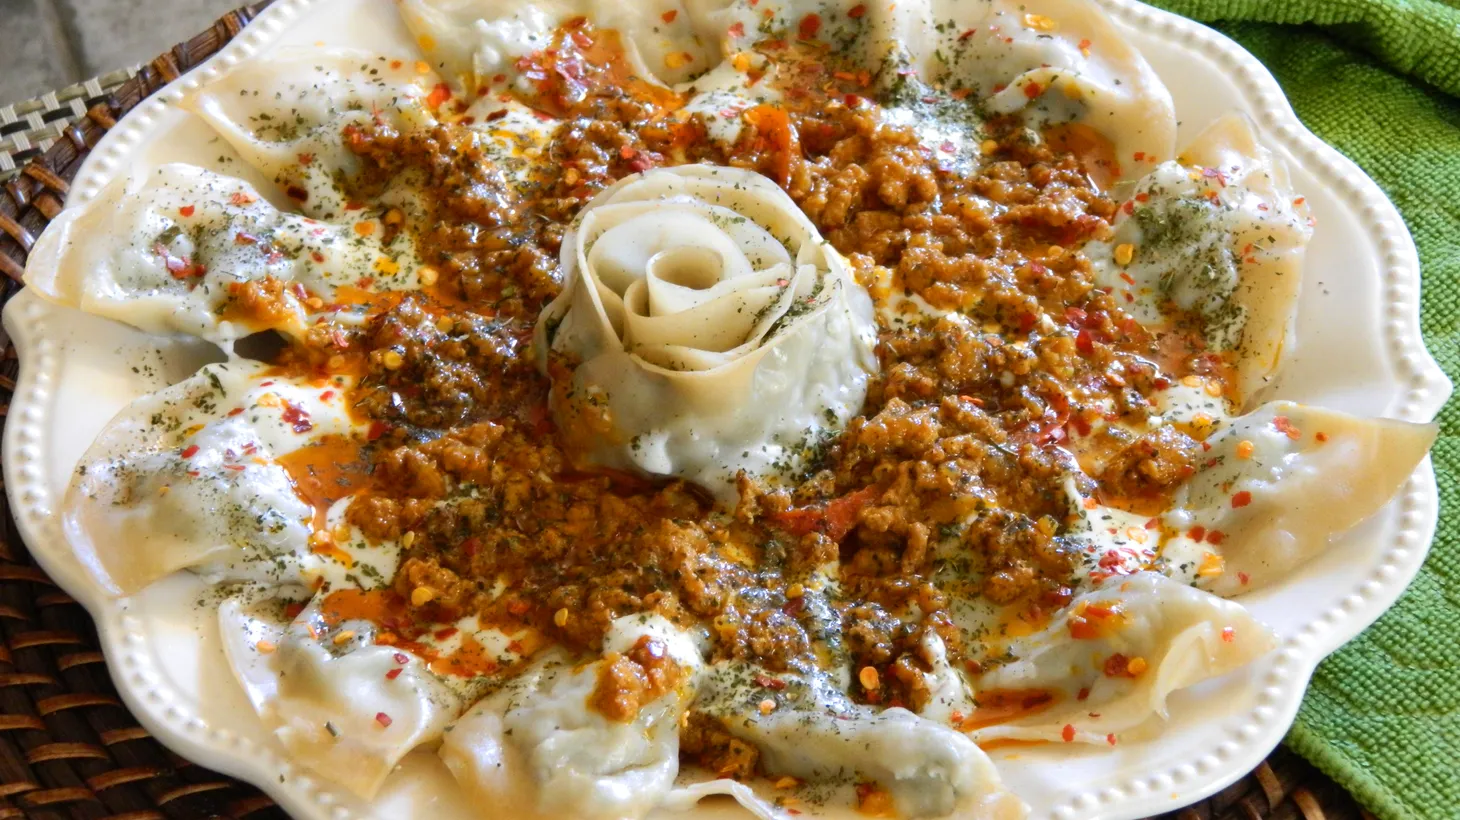 Ashak dumplings are filled with leeks and spices, steamed, and served with meat sauce and yogurt.